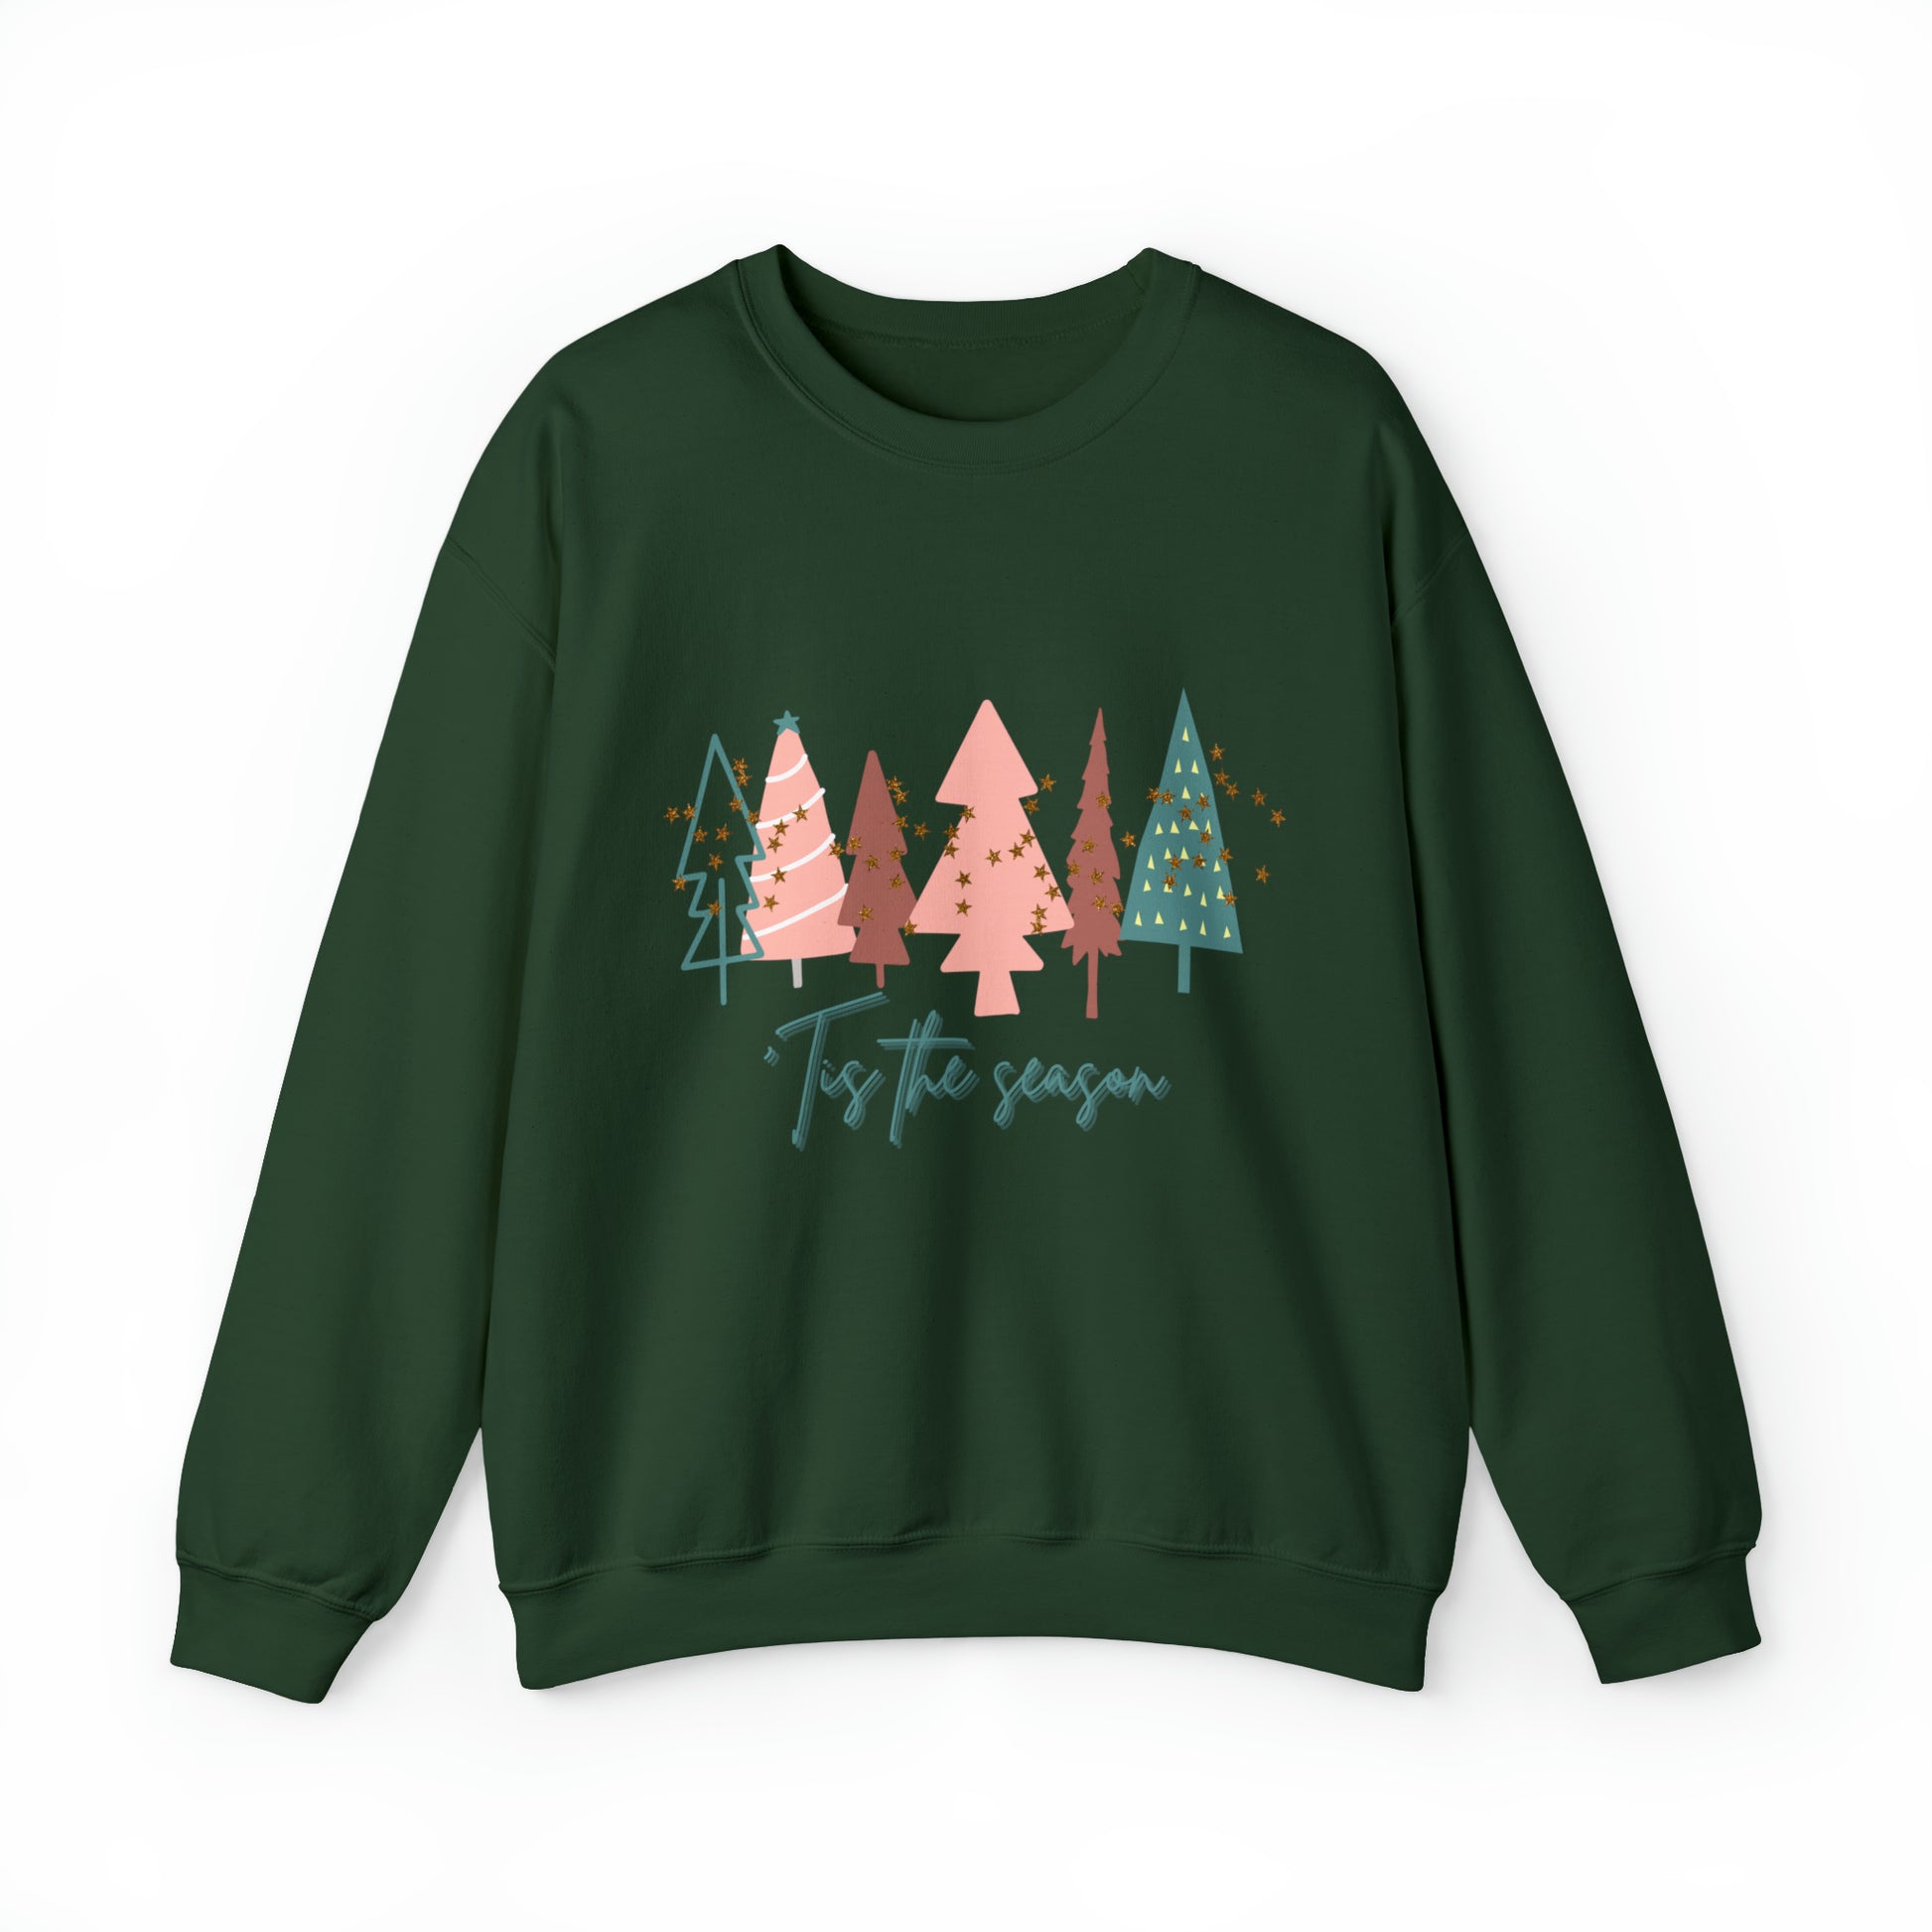 A cozy green Christmas Tree Sweatshirt with trees on it, perfect for winter.